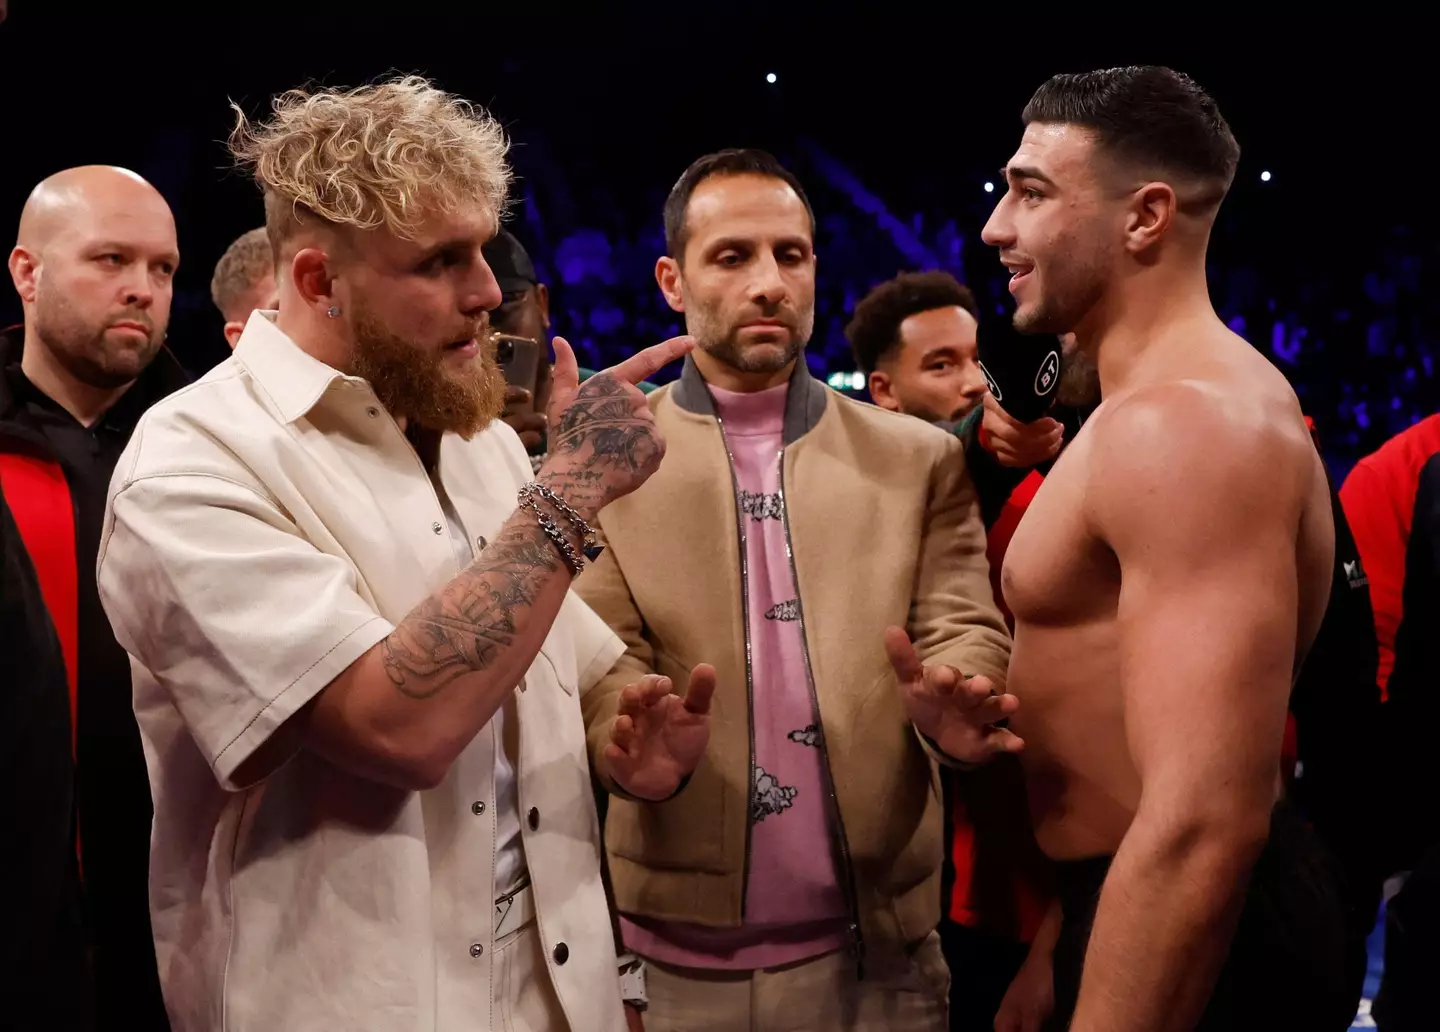 Jake Paul and Tommy Fury have been at each other's throats for months.